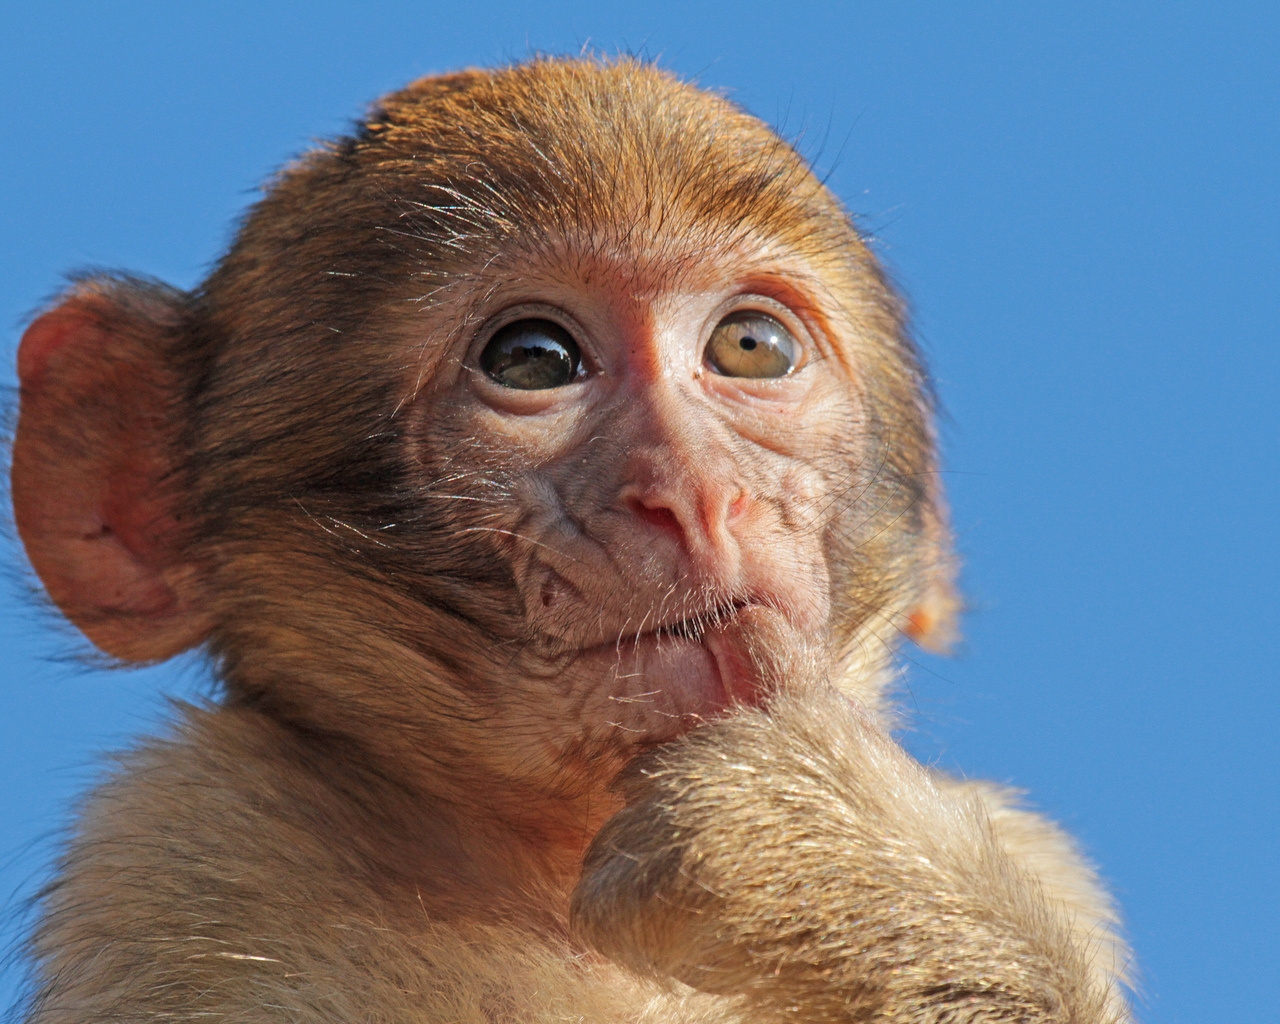 Macaque Monkey for 1280 x 1024 resolution